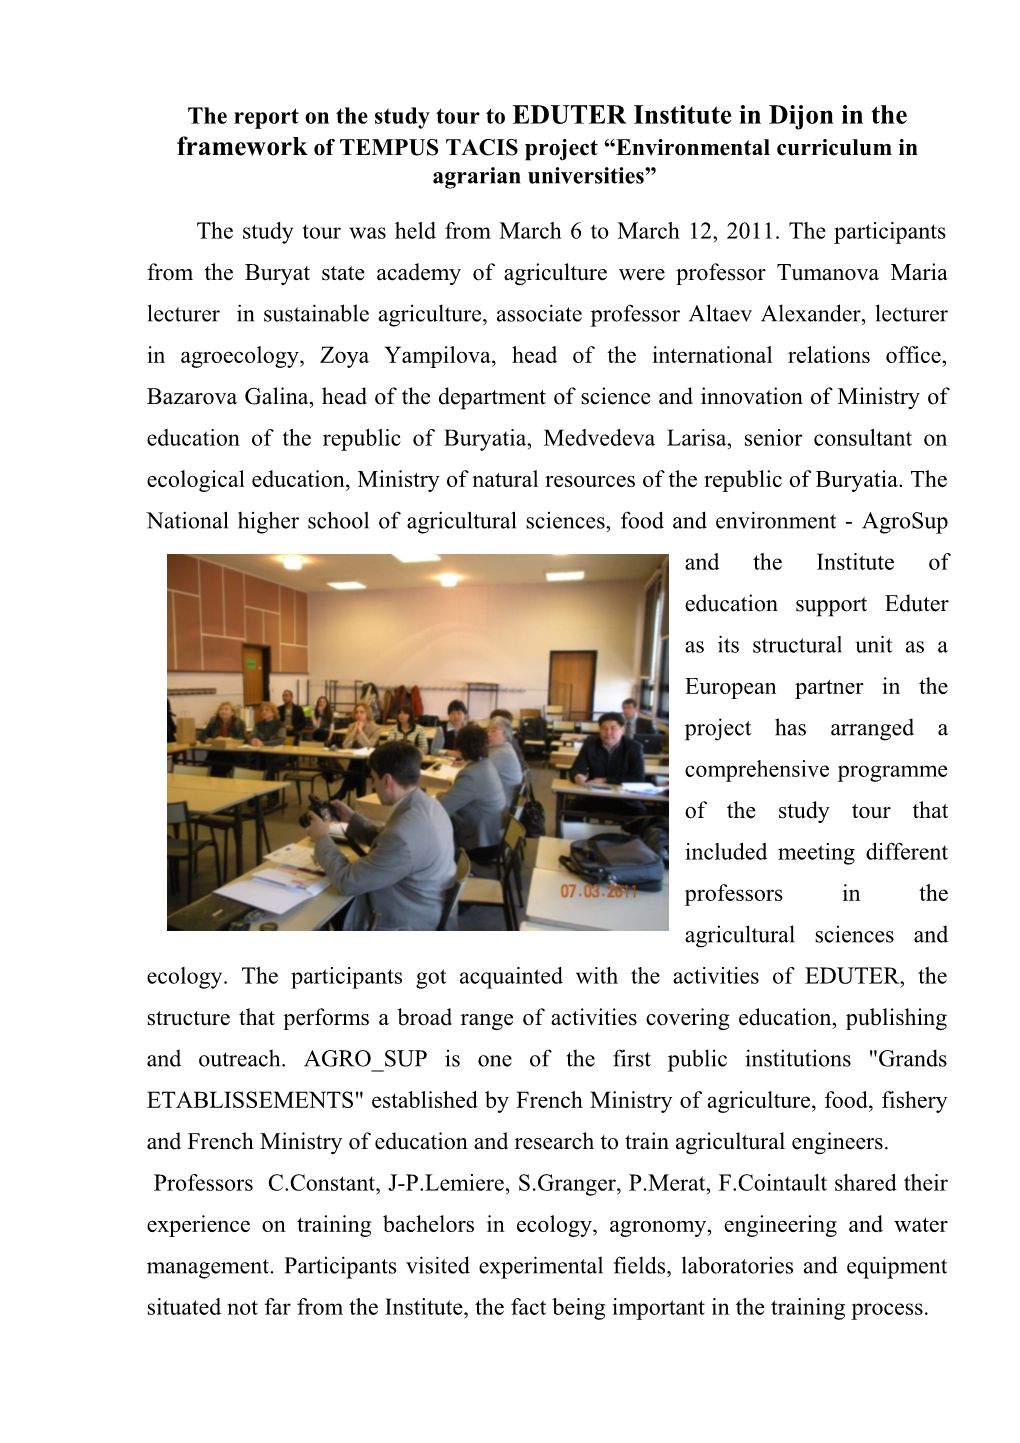 The Report on the Study Tour to Eduterinstitute in Dijon in the Framework of TEMPUS TACIS